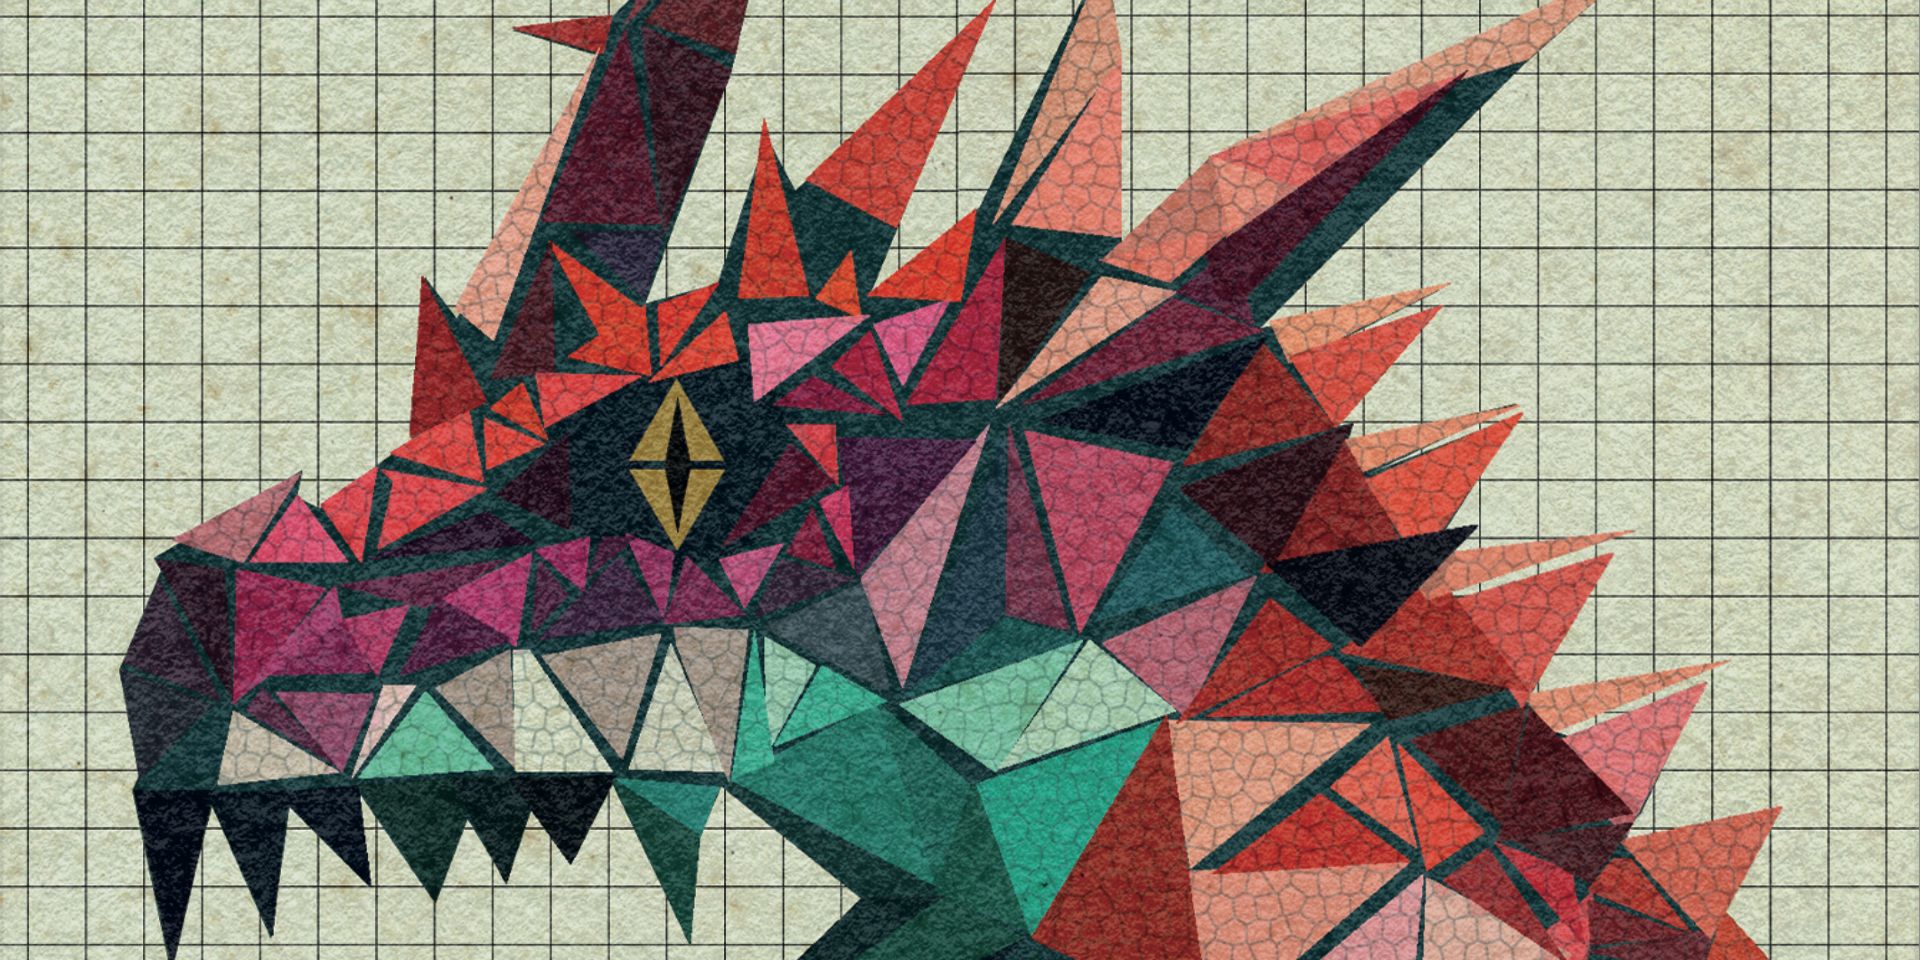 Artwork for a dungeon game, showing a dragon made up of multicolored triangles in front of a grid similar to that of a TTRPG battle mat.